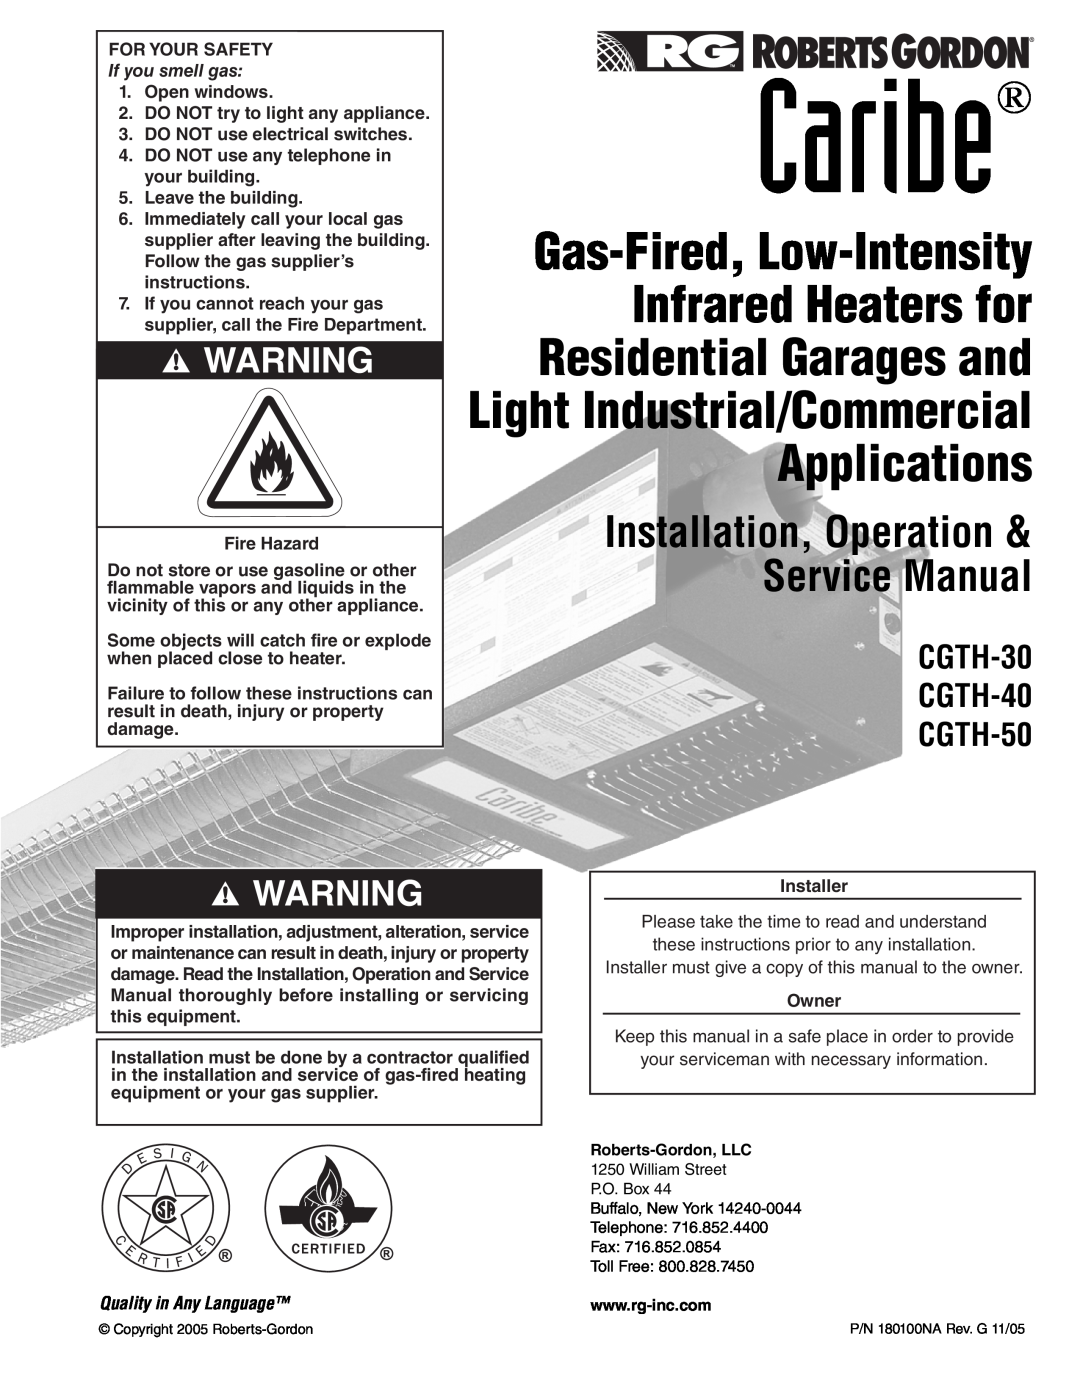 Roberts Gorden CGTH-50 service manual Gas-Fired, Low-Intensity, Infrared Heaters for, Residential Garages and, CGTH-30 